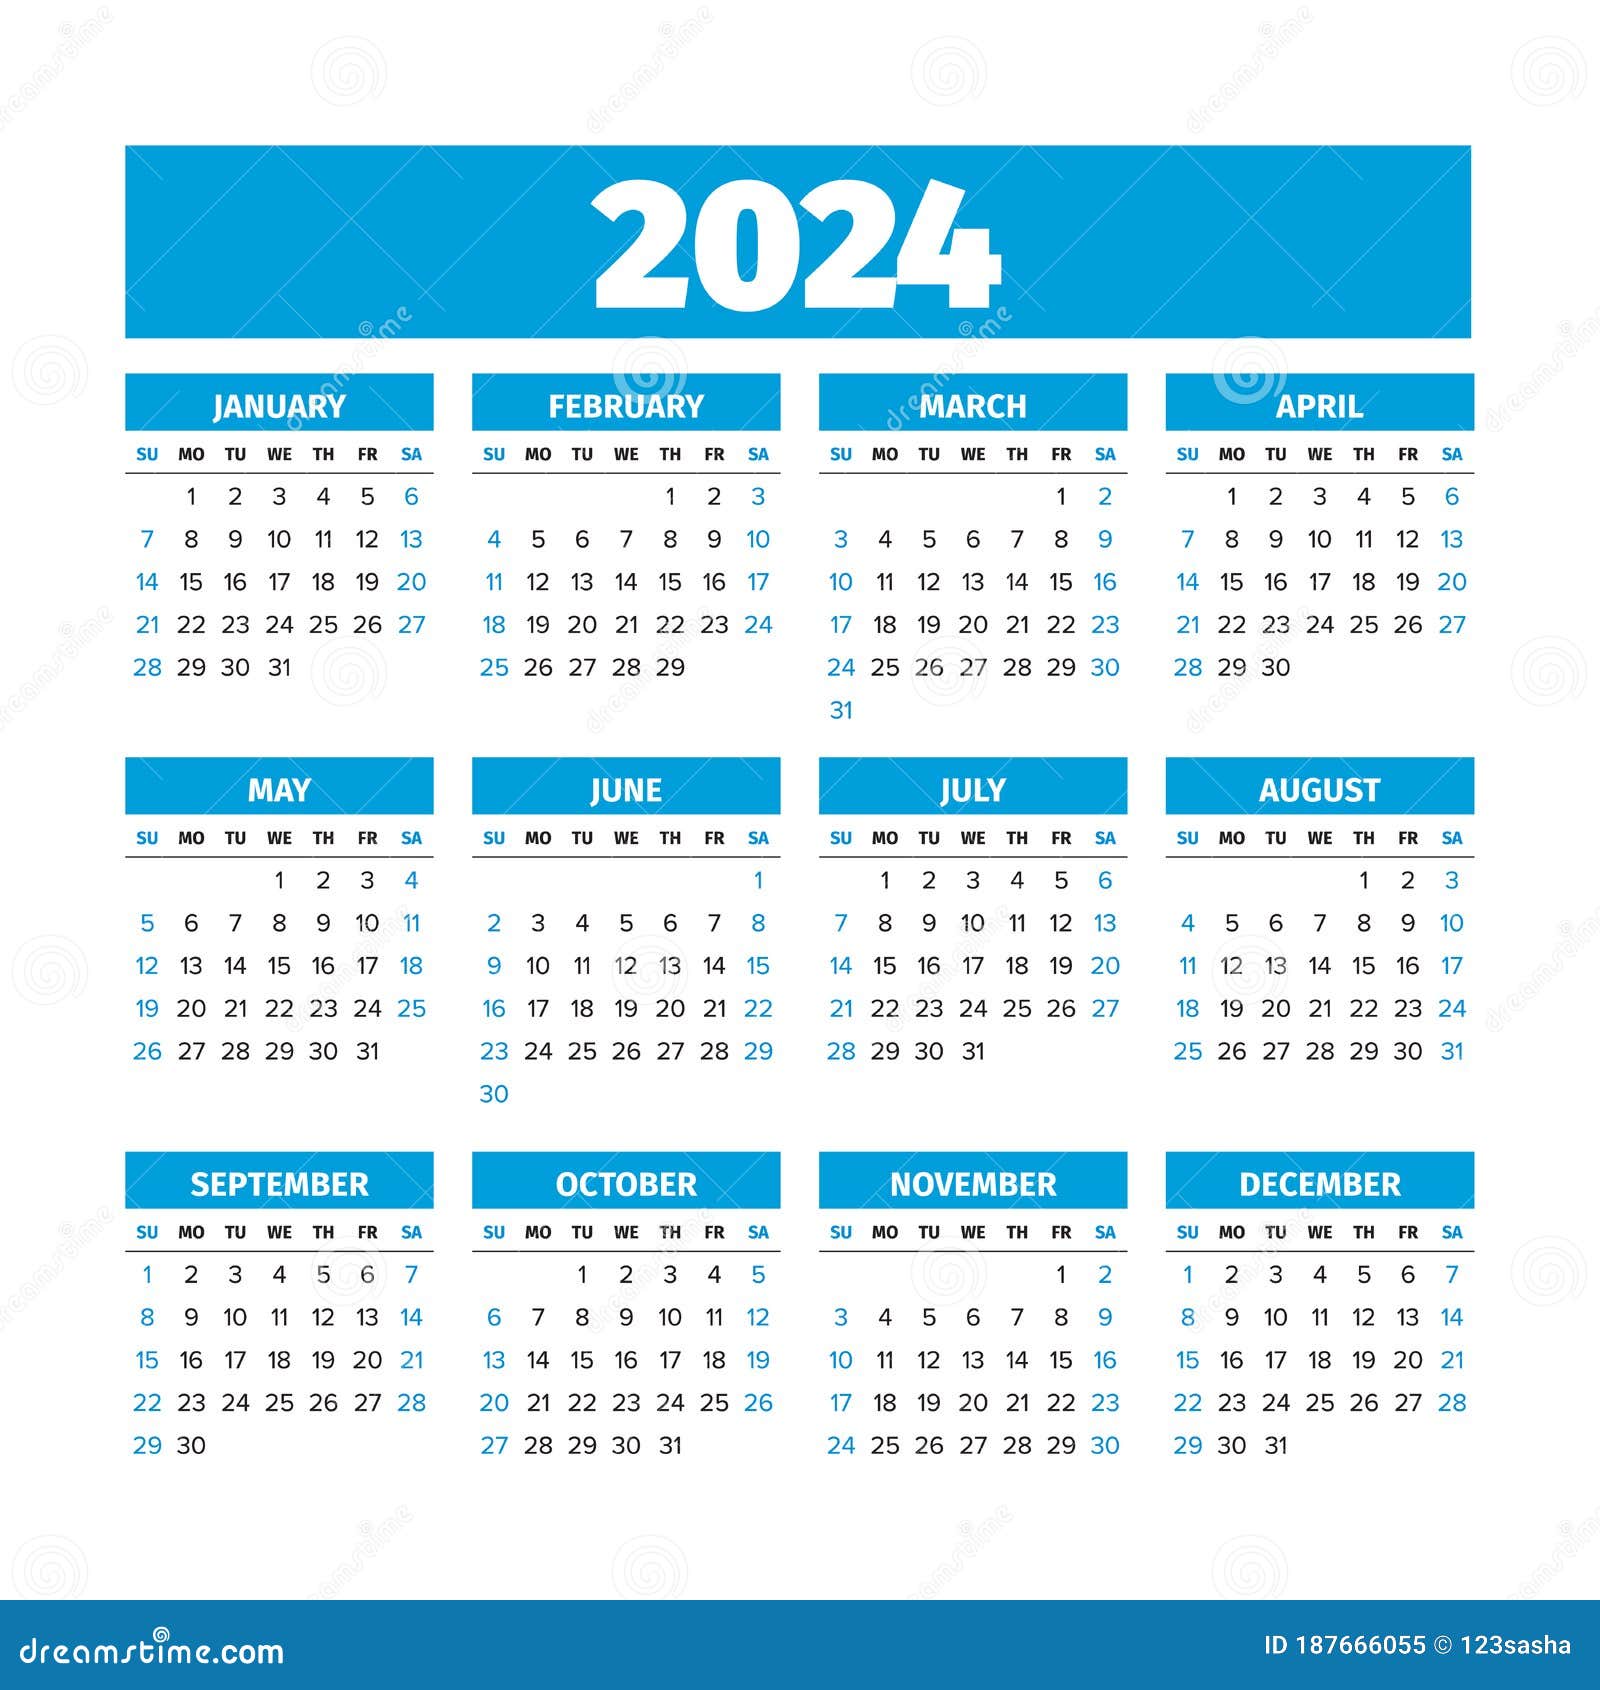 online calendar 2024 with week numbers qualads what is todays date